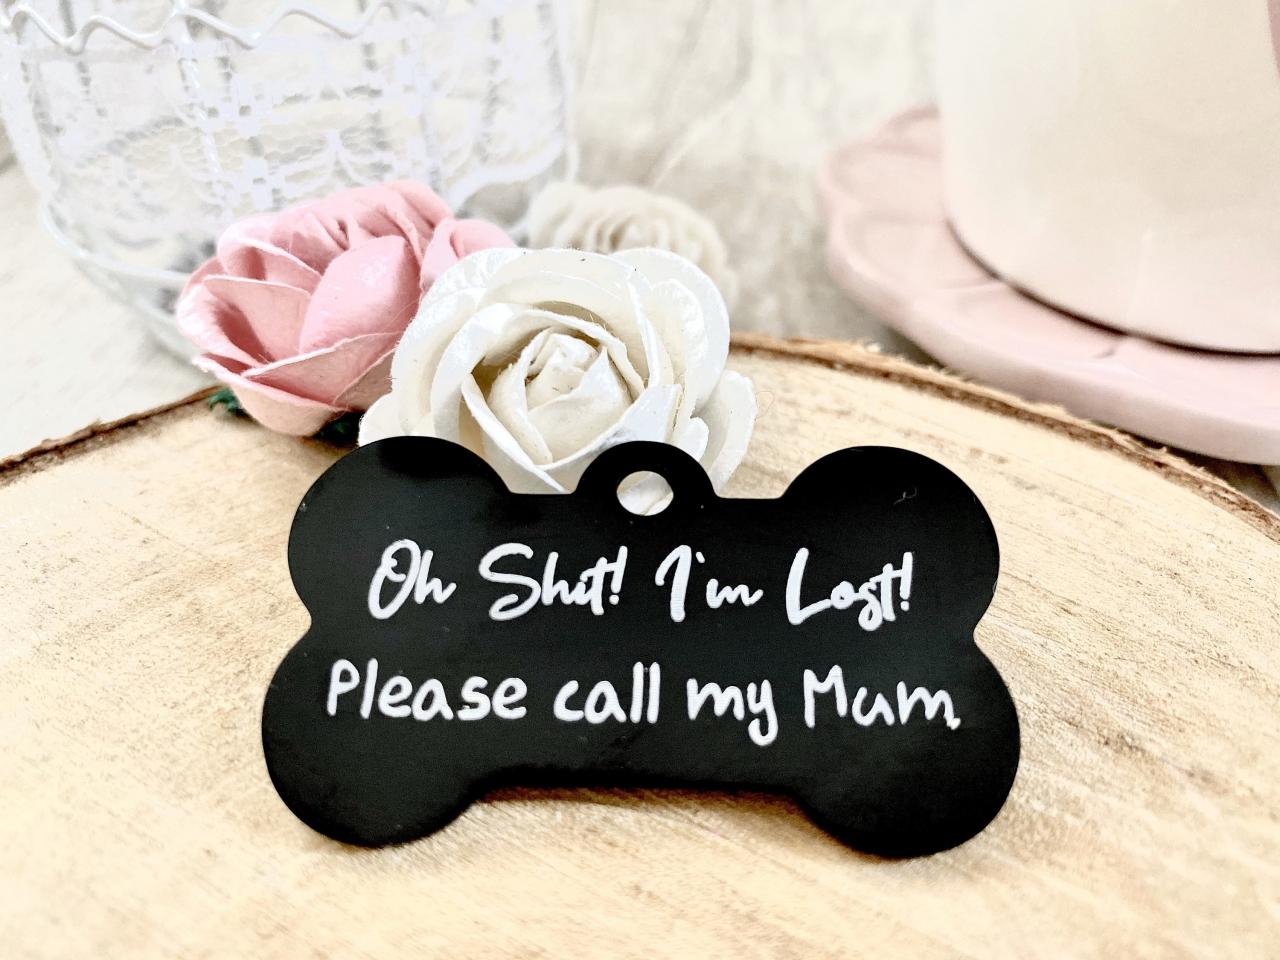 Personalised Dog Tag, Pet ID, Bone Tag, Bone ID, Funny Pet Tag, Collar Accessory, Chipped Dog Tag, Engraved Pet Identification, Dog Collar